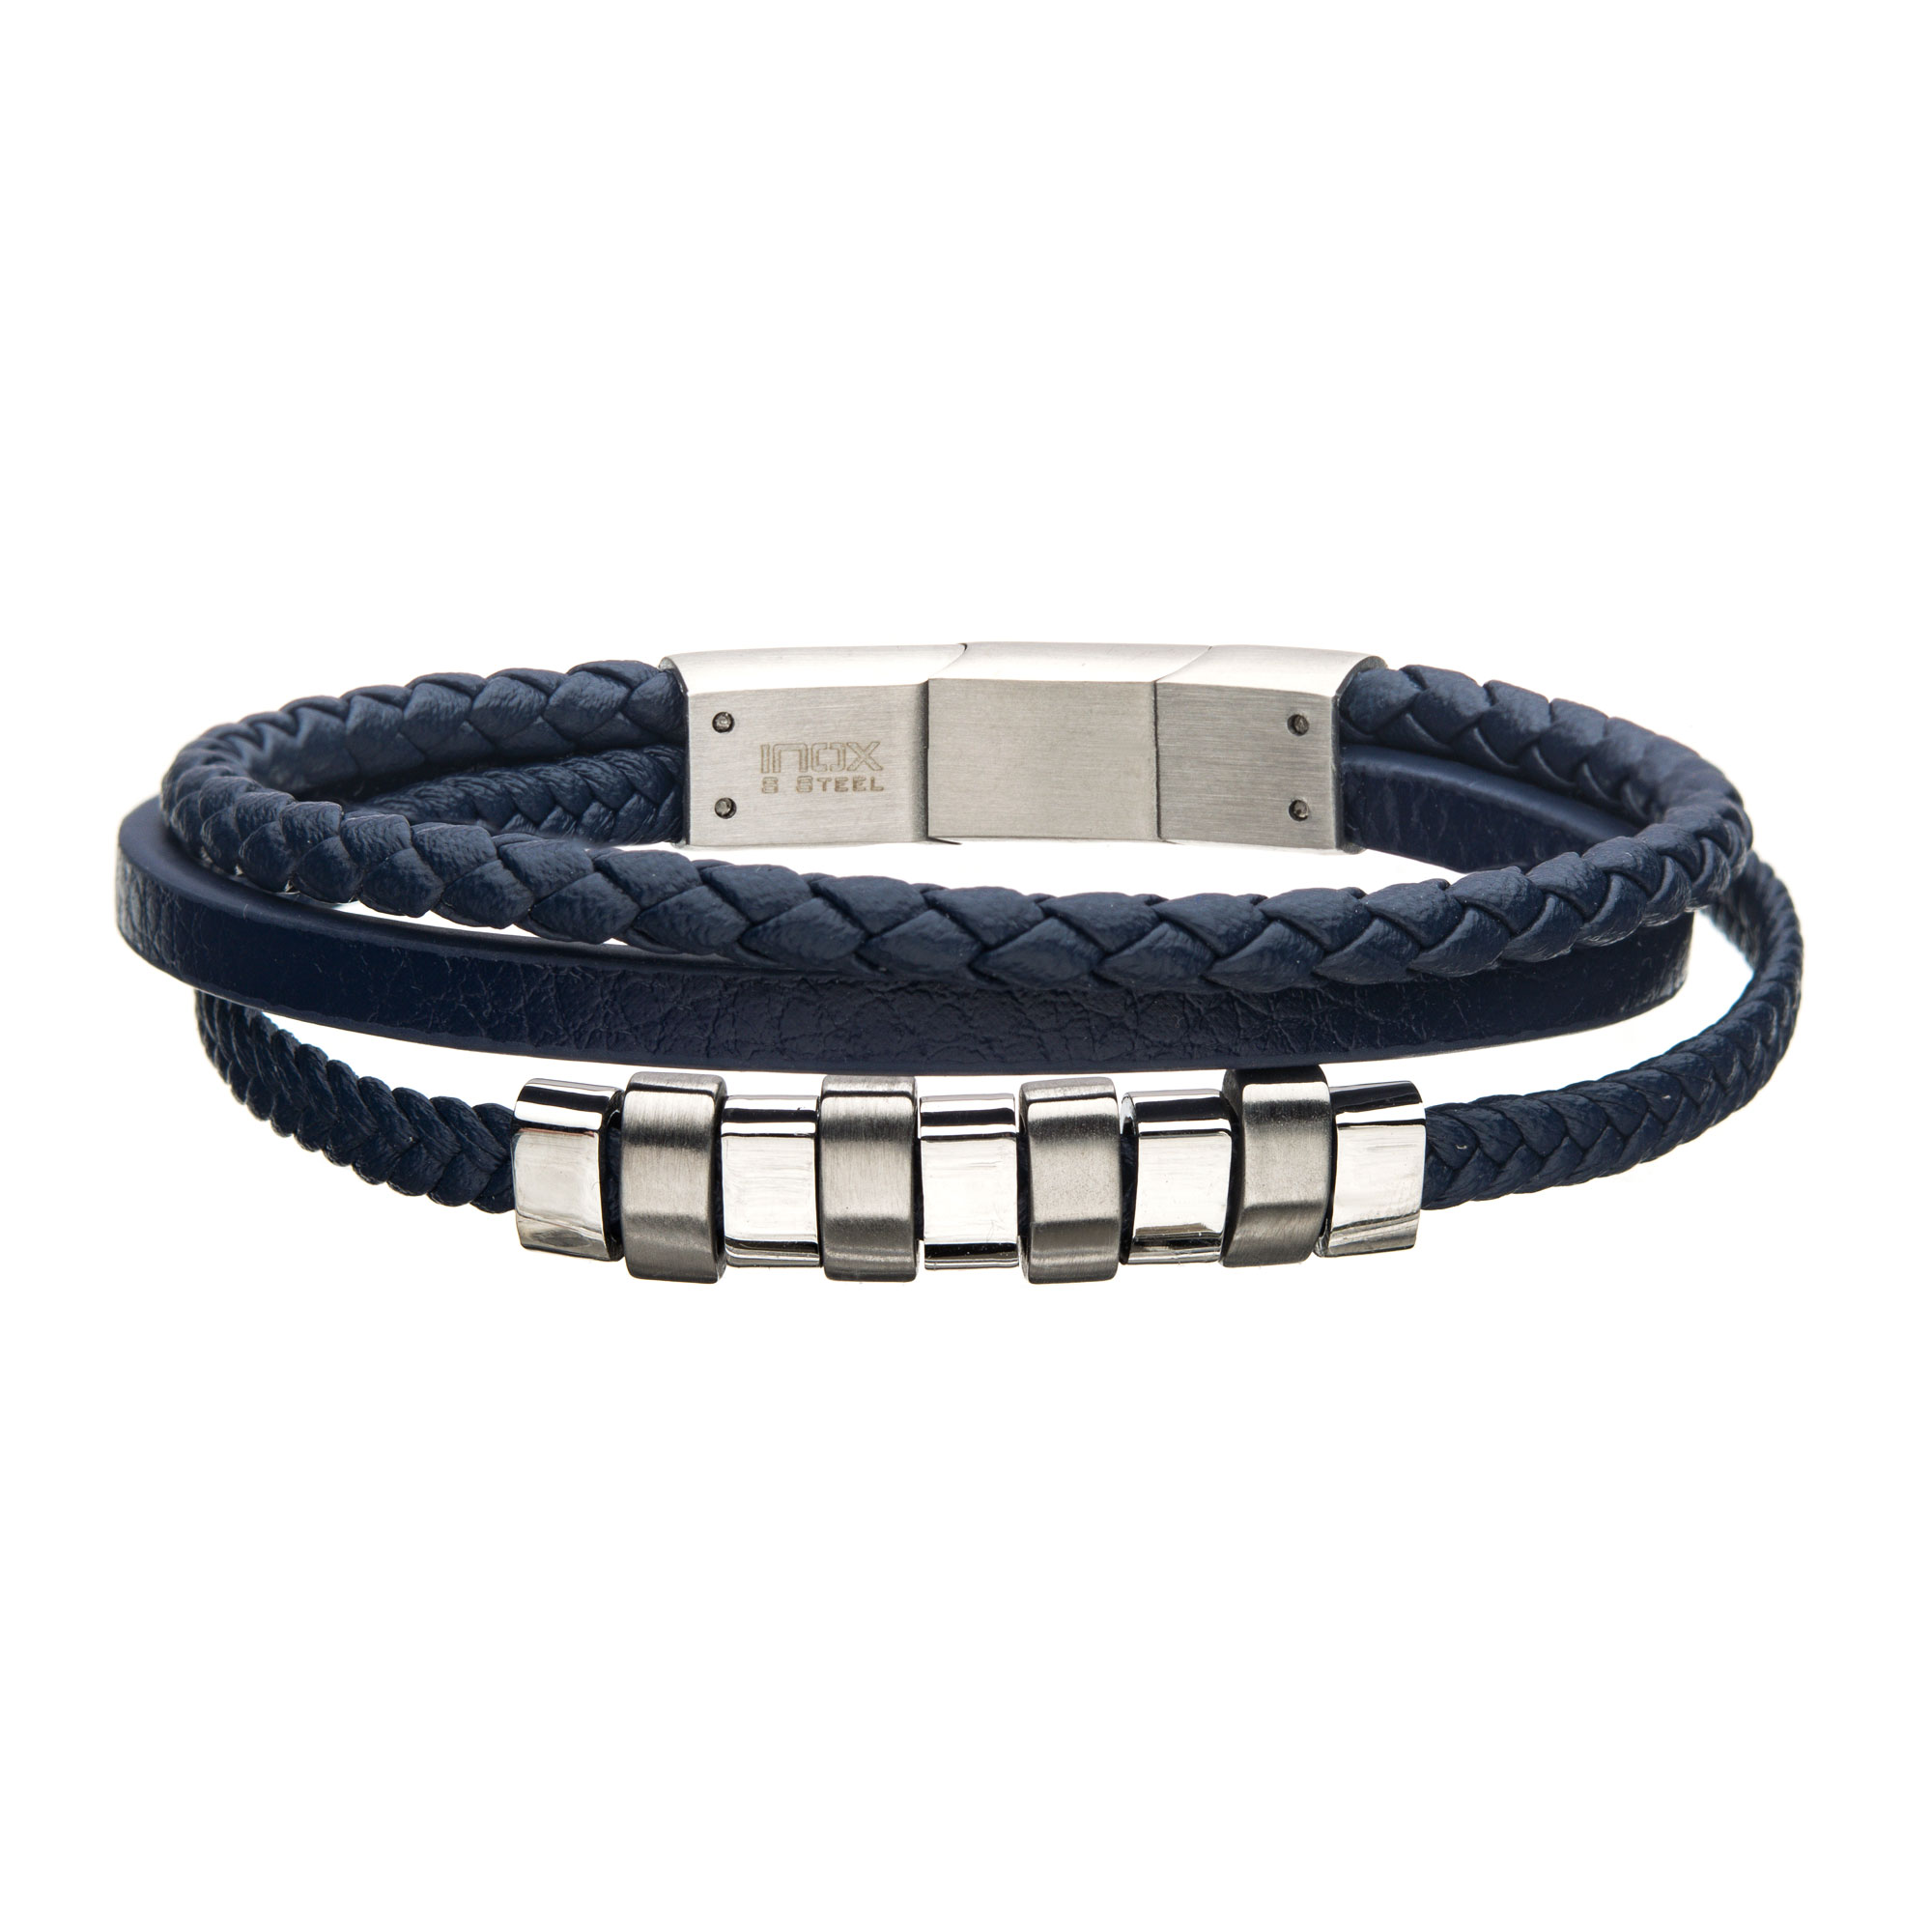 Blue Braided Multi Leather with Steel Beads Bracelet Lewis Jewelers, Inc. Ansonia, CT